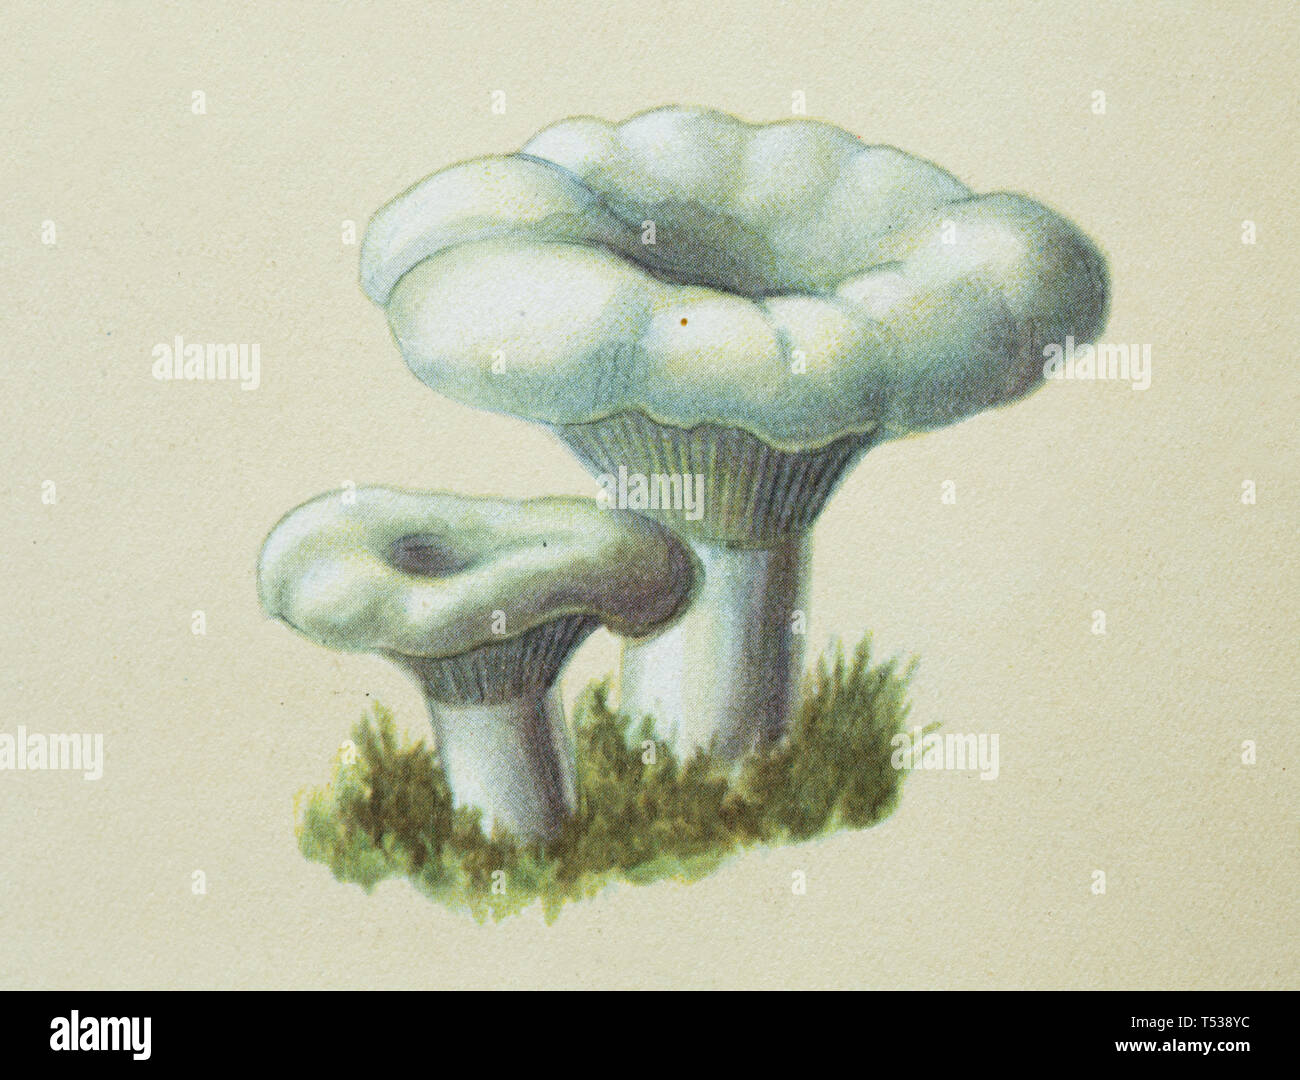 Milk mushroom (Lactarius resimus) depicted in the colour illustration in the Book of Tasty and Healthy Food published in the Soviet Union (1953). Stock Photo